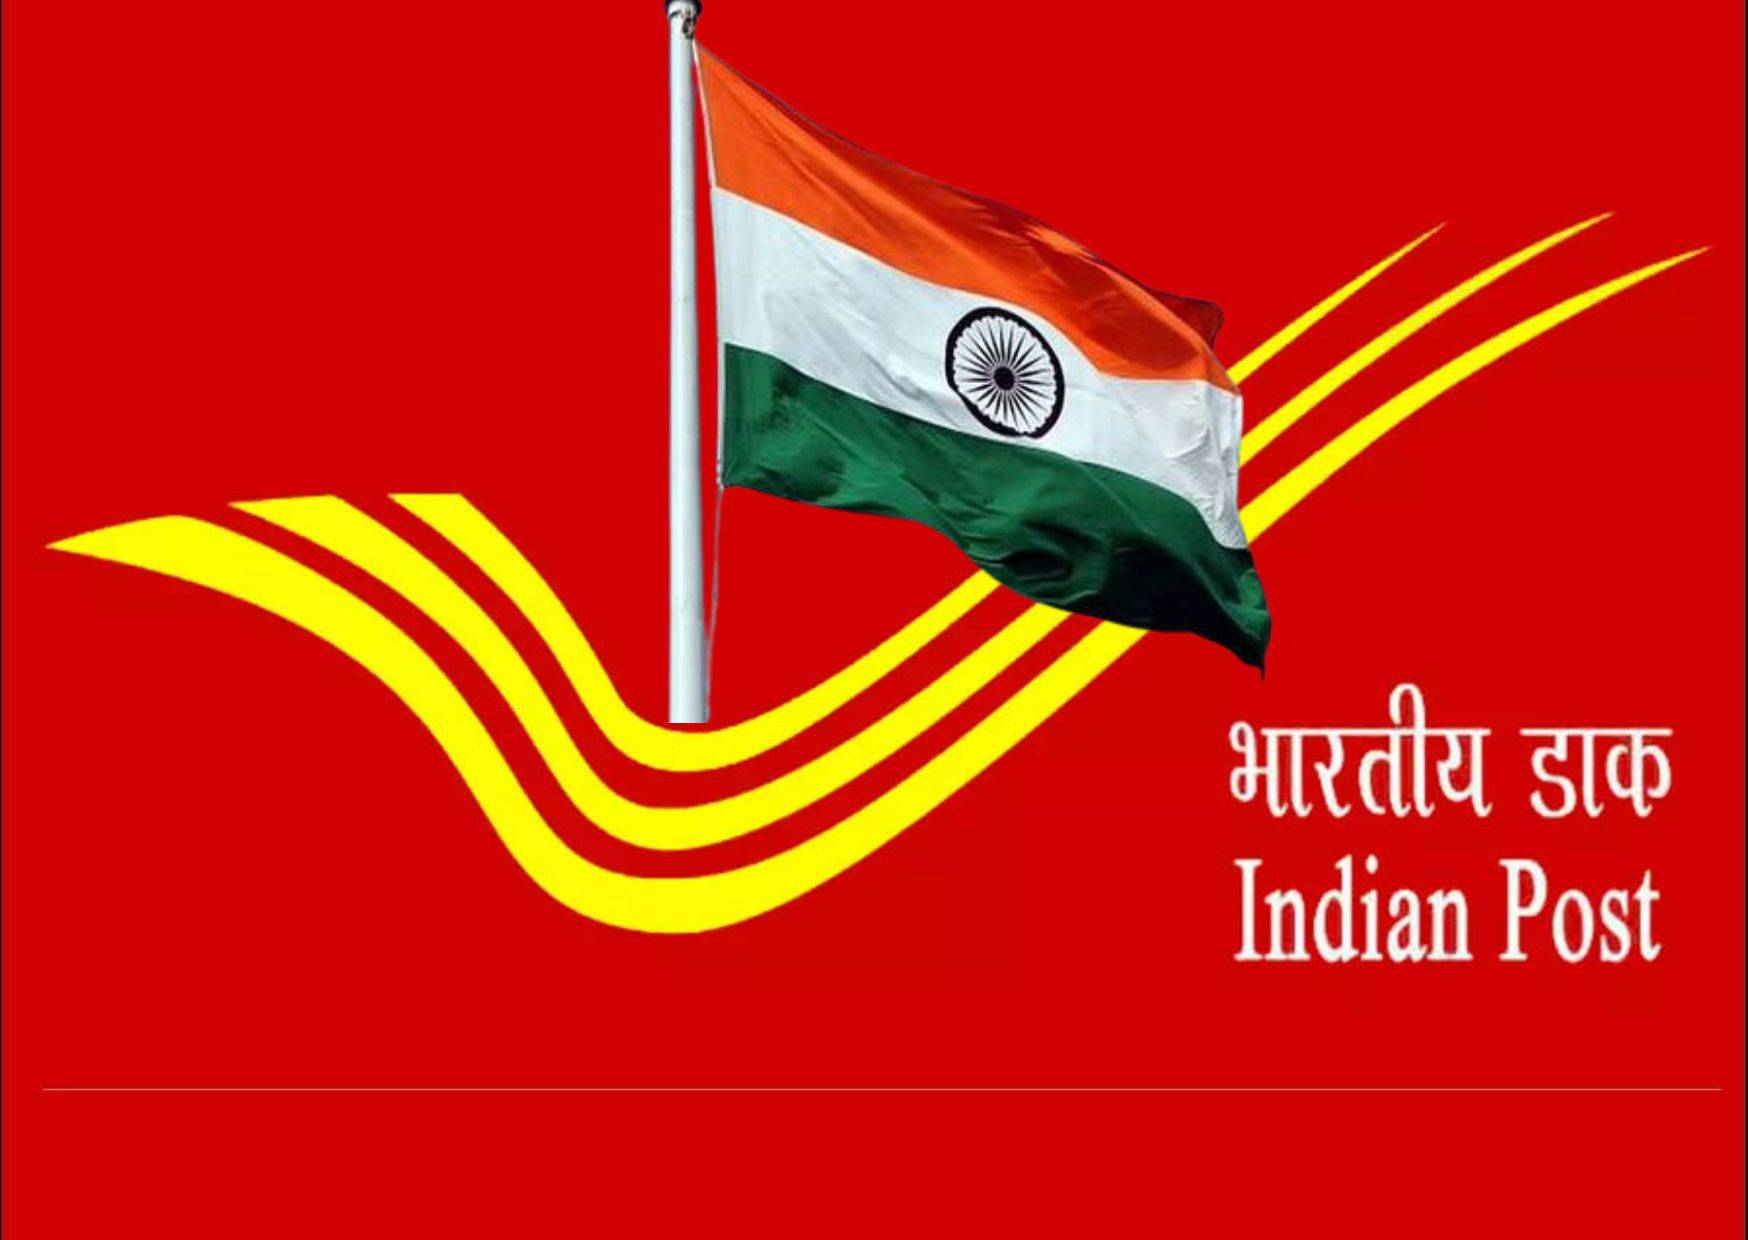 Har Ghar Tiranga: Department of Posts sells over 1 crore national flags in 10